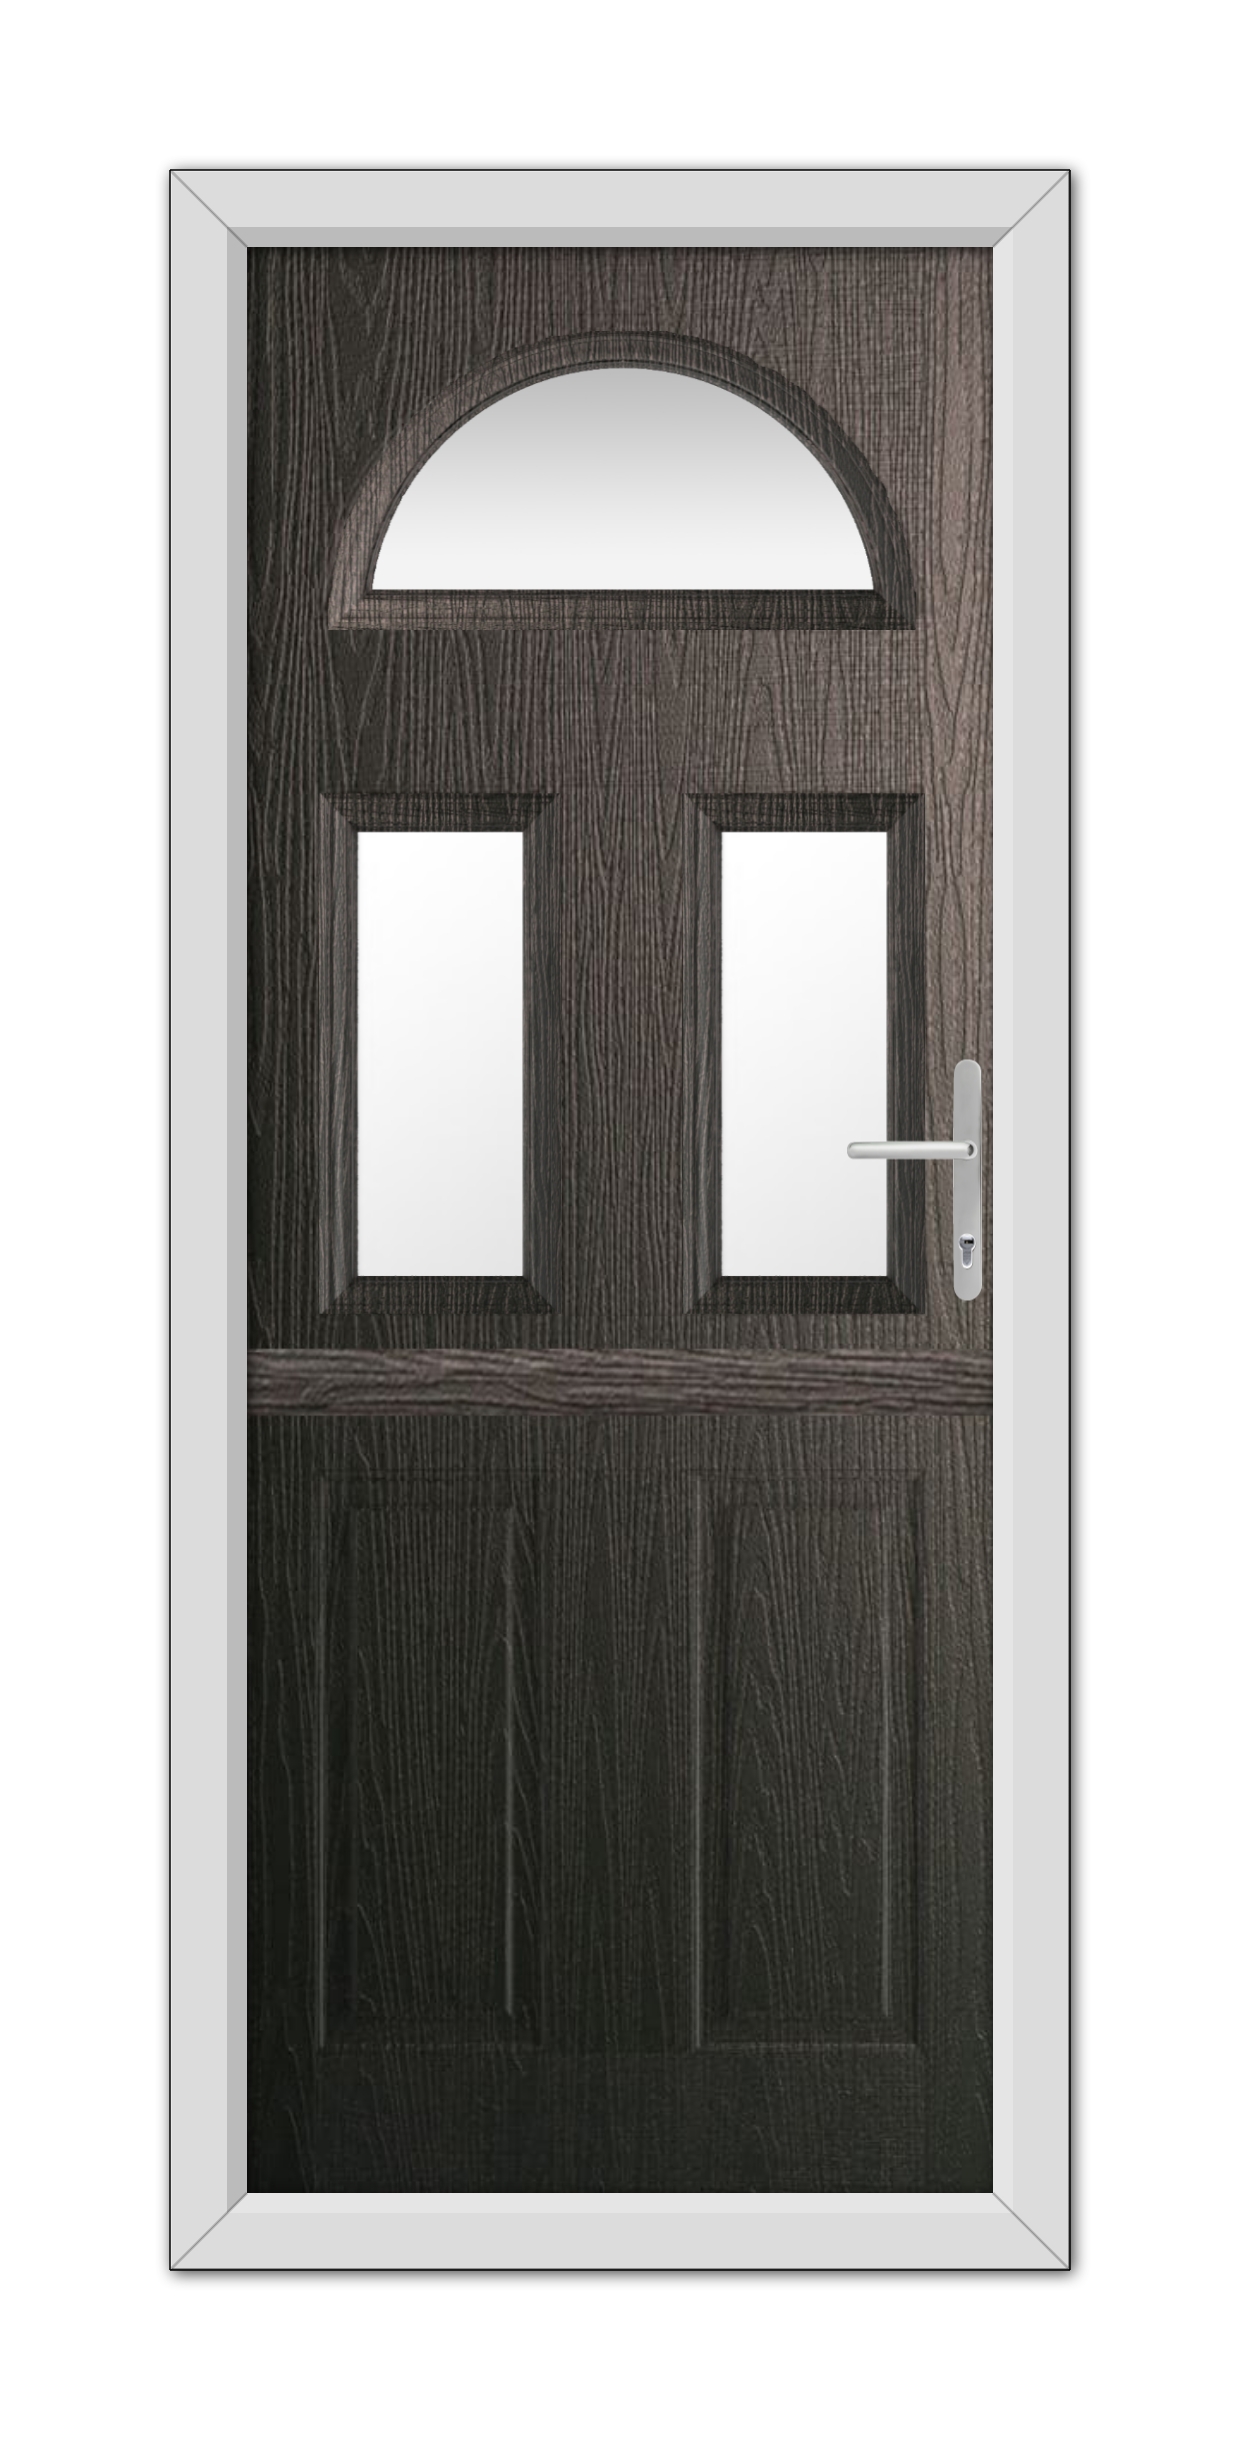 A modern Schwarzbraun Winslow 3 Stable Composite Door 48mm Timber Core with a large arched window and a metal handle, set in a simple white frame.